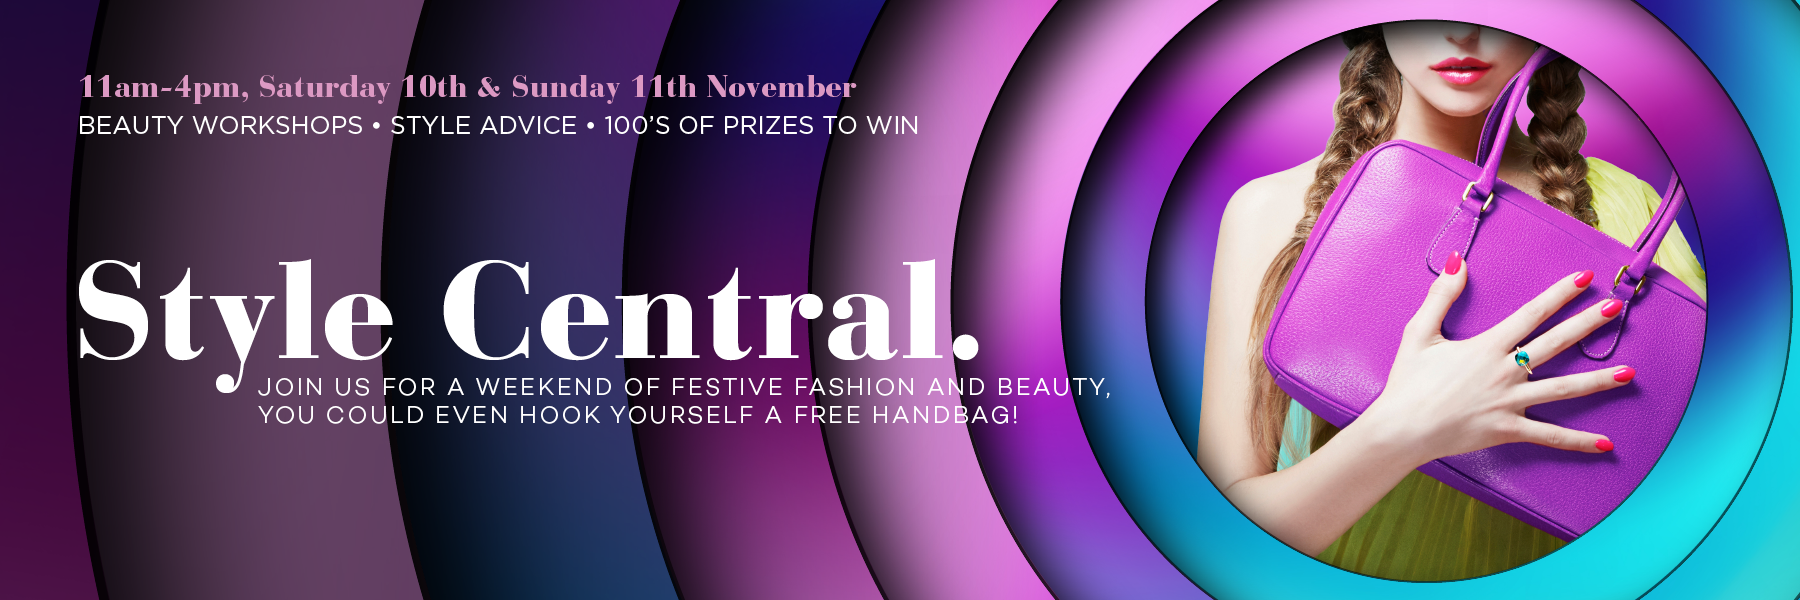 Style Central – Festive Fashion Event